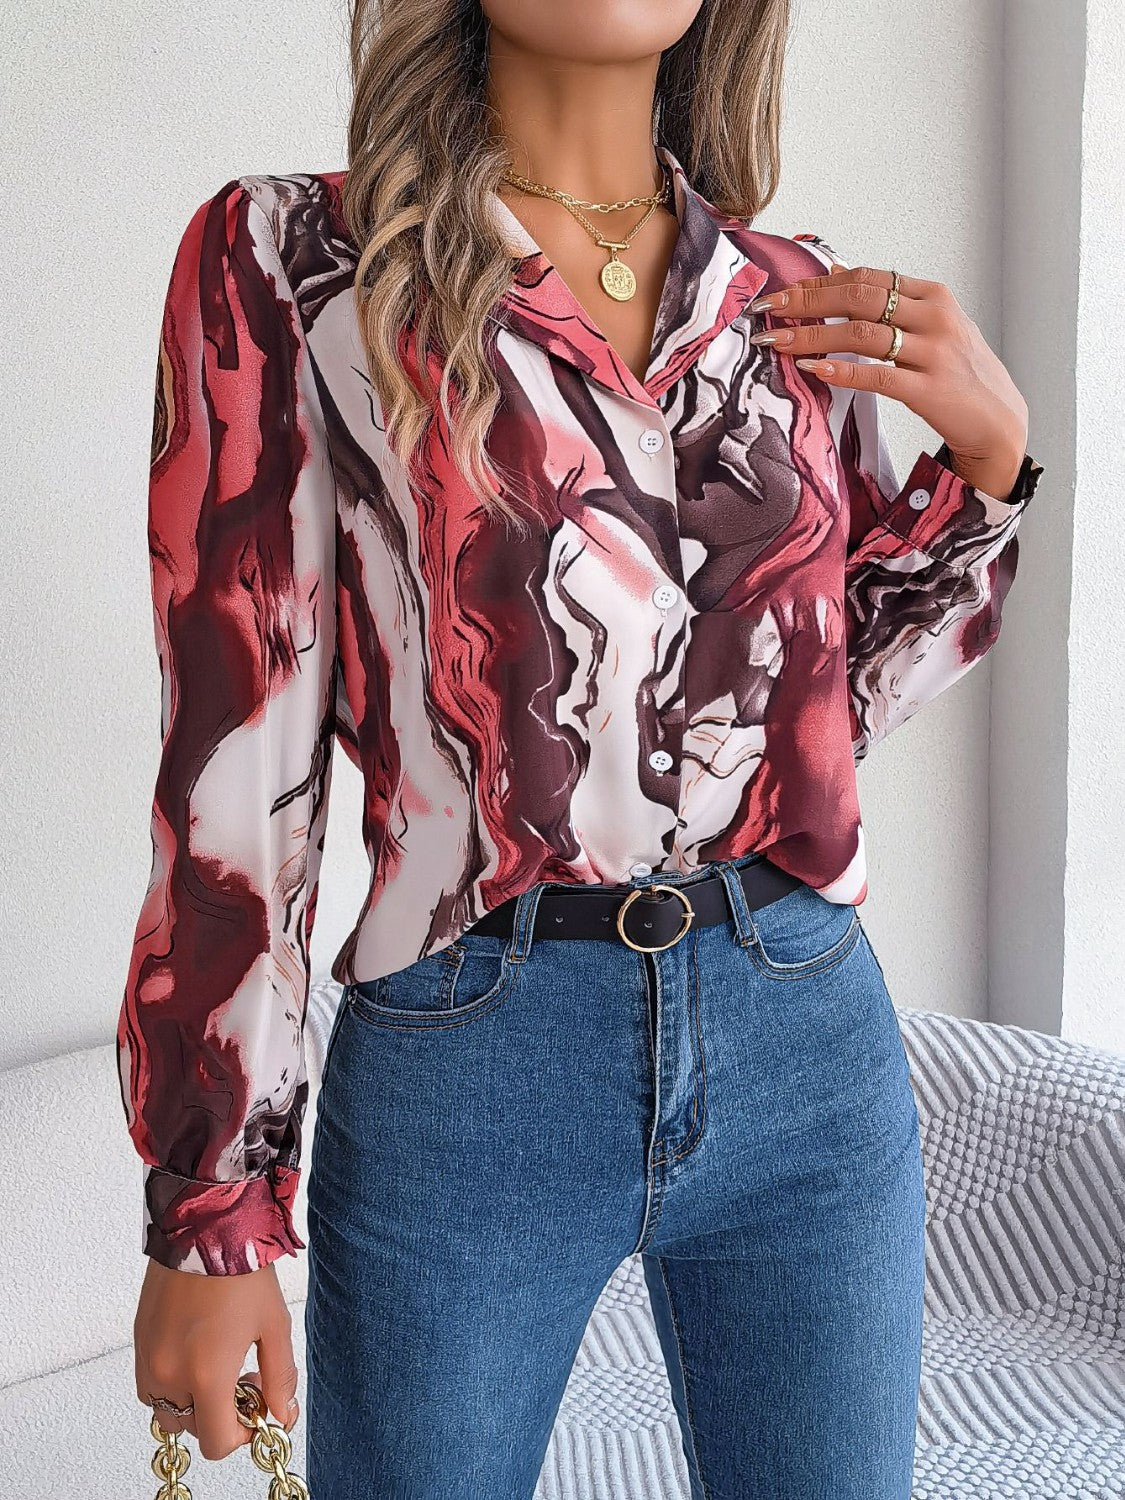 Marbleized Charm Button Up Blouse